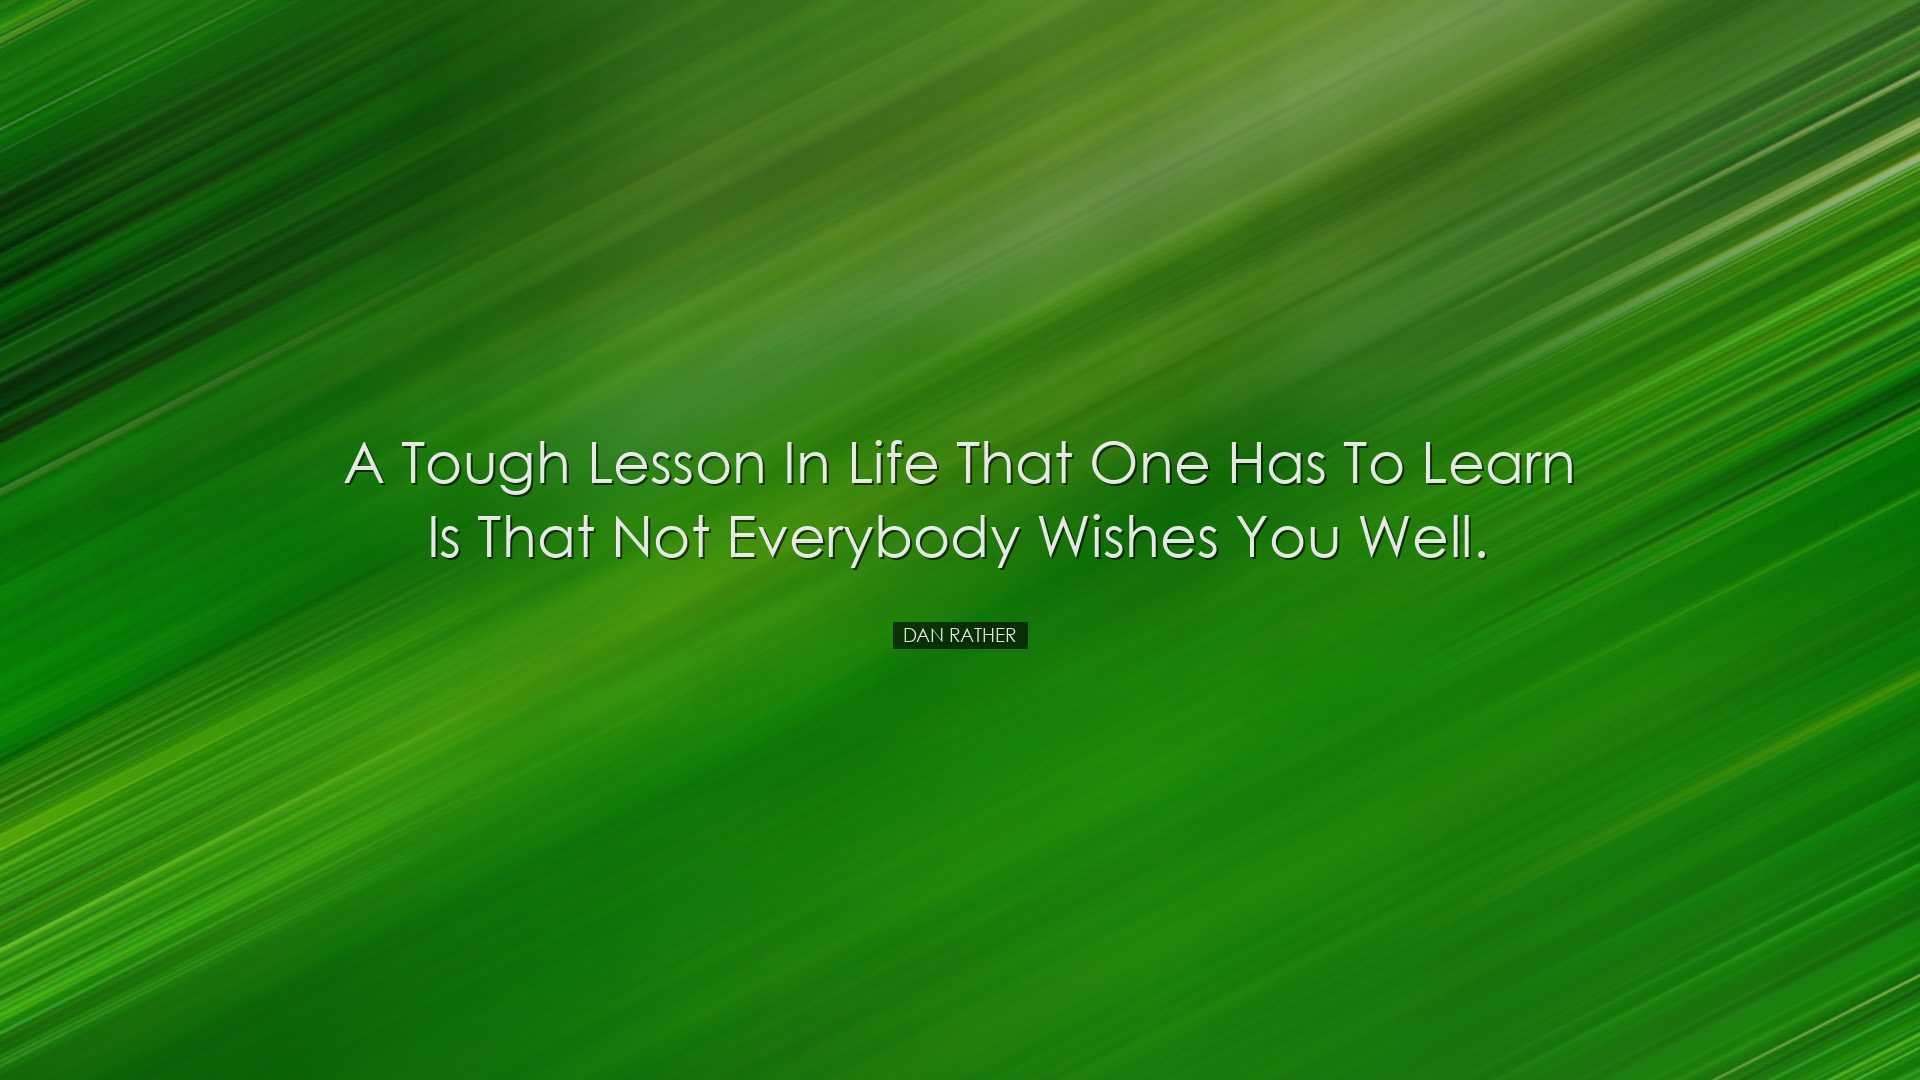 A tough lesson in life that one has to learn is that not everybody